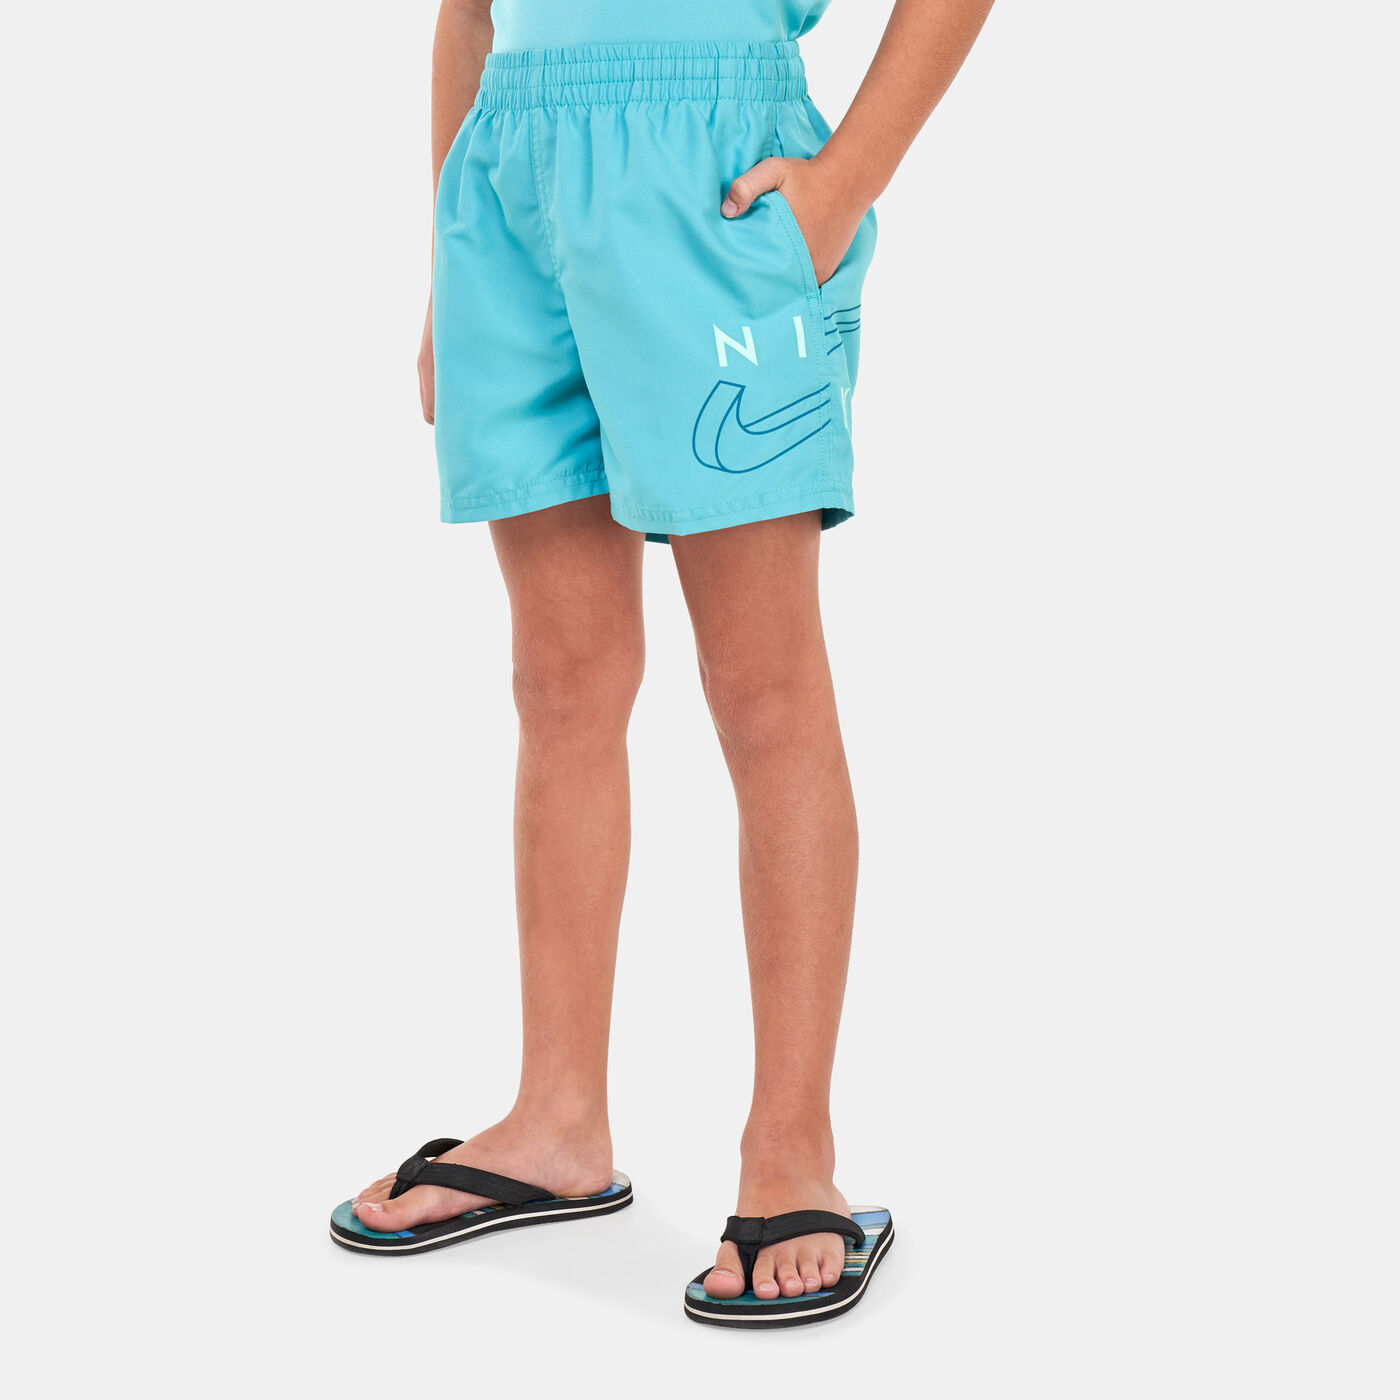 Kids' 4-inch Volley Shorts